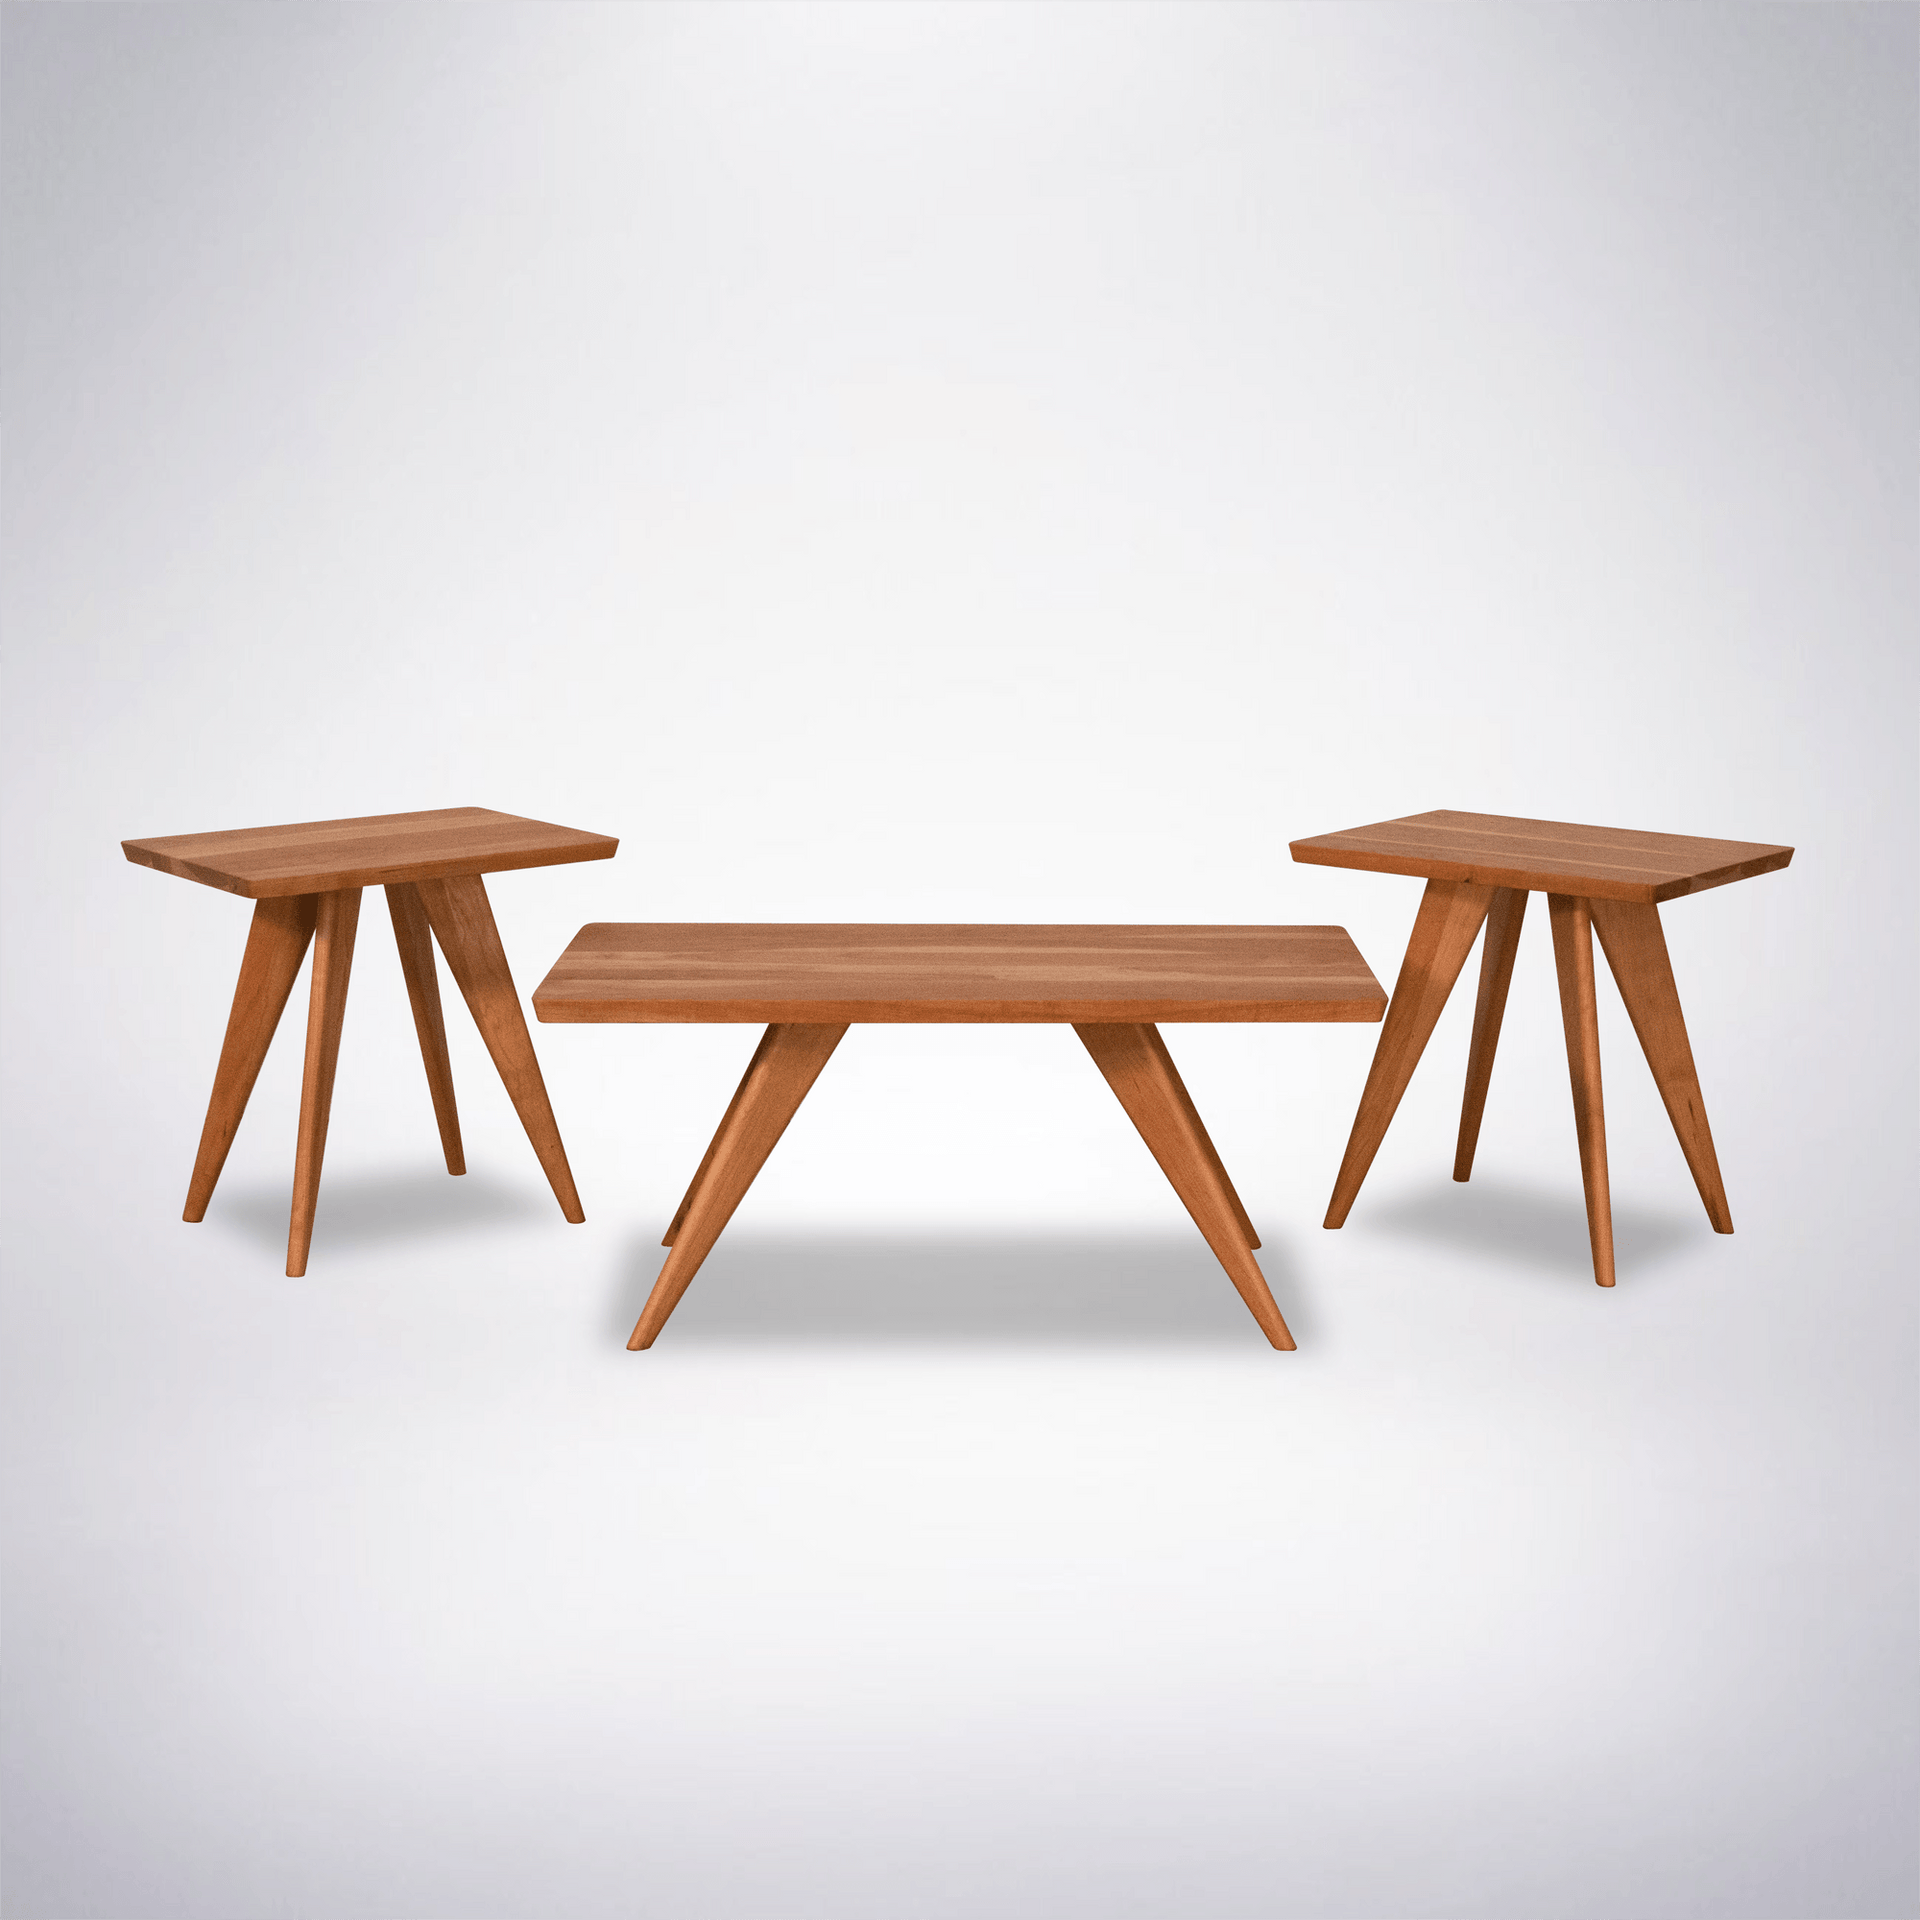 40 x 20 coffee table shown with essentials side tables in cherry